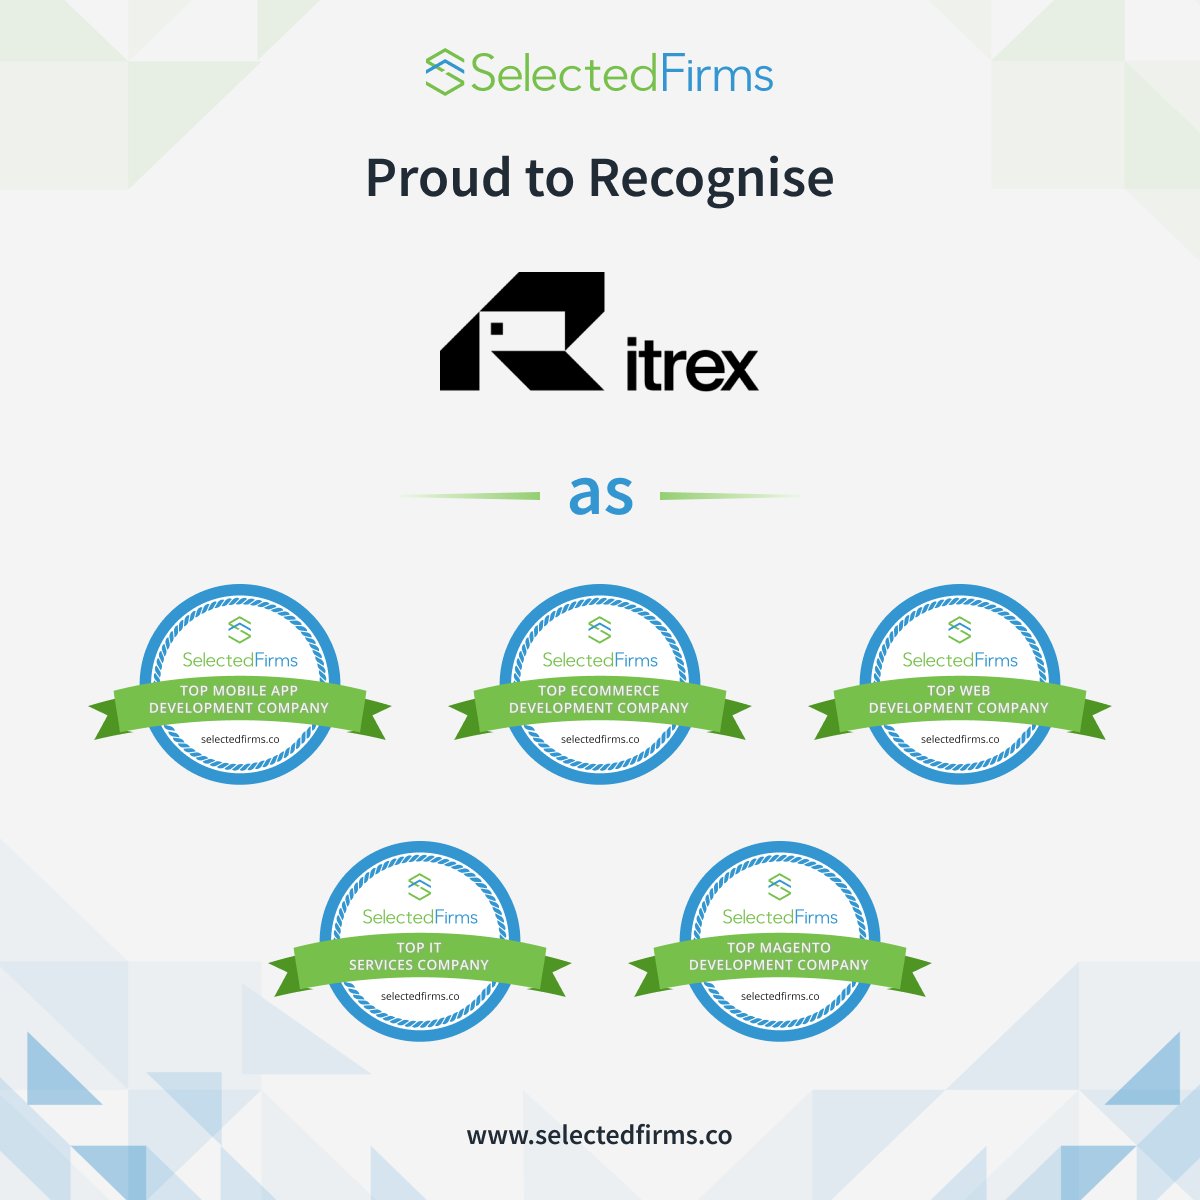 SelectedFirms is happy to recognise @ITRexGroup as
Top Mobile App Development in the USA
Top eCommerce Development
Top eCommerce Development in the USA
Top Web Development in the USA
Top IT services in the USA
Top Magento Development in the USA
Top Mobile App Development in India